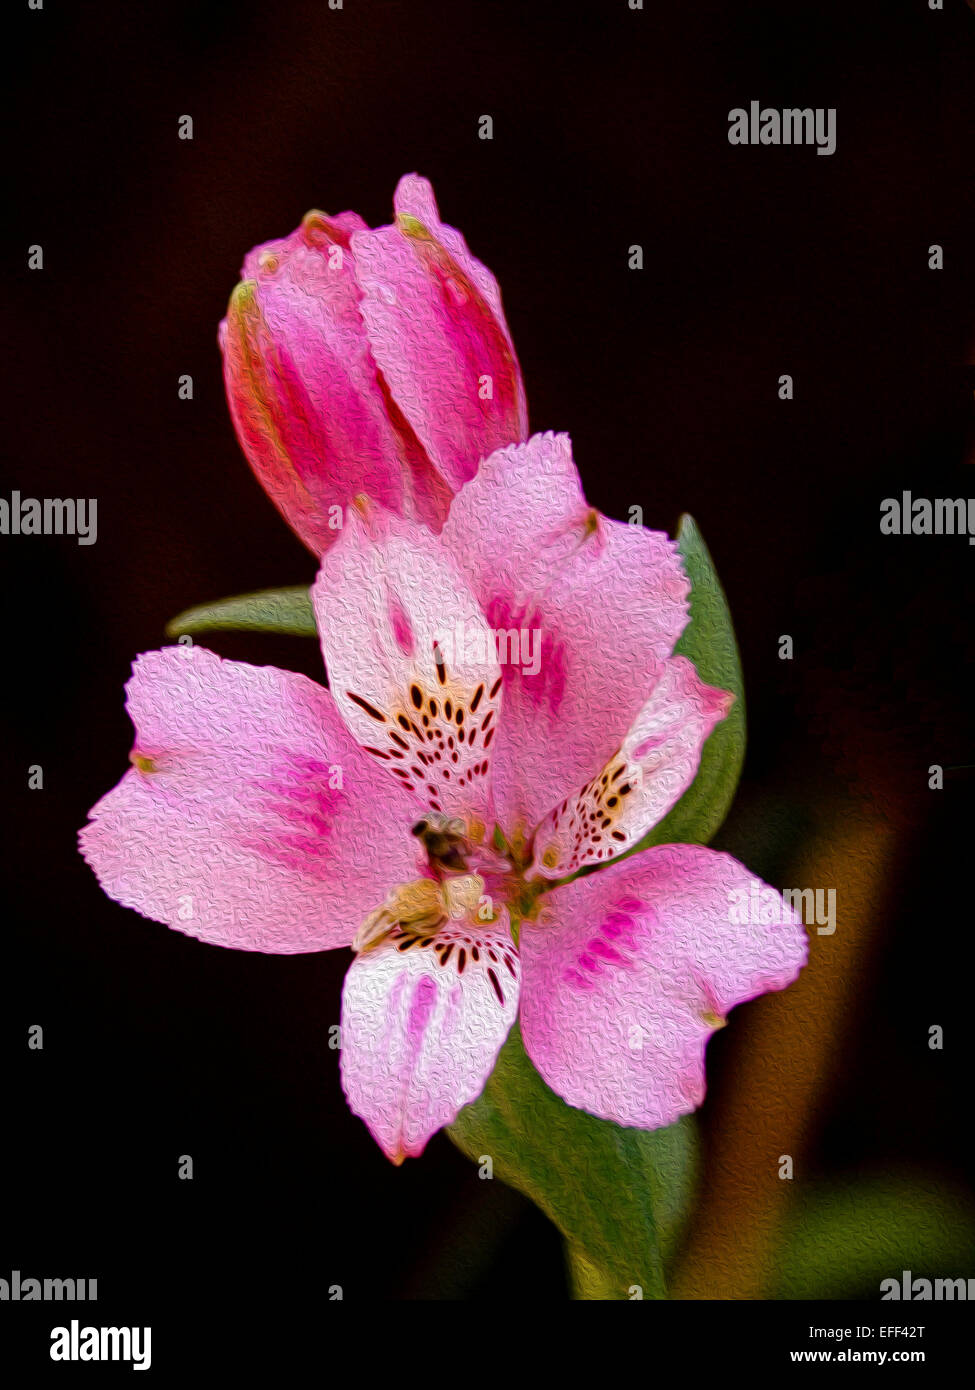 Vivid pink bud and flower with speckled petals of Alstroemeria, Peruvian / princess lily, against black background Stock Photo